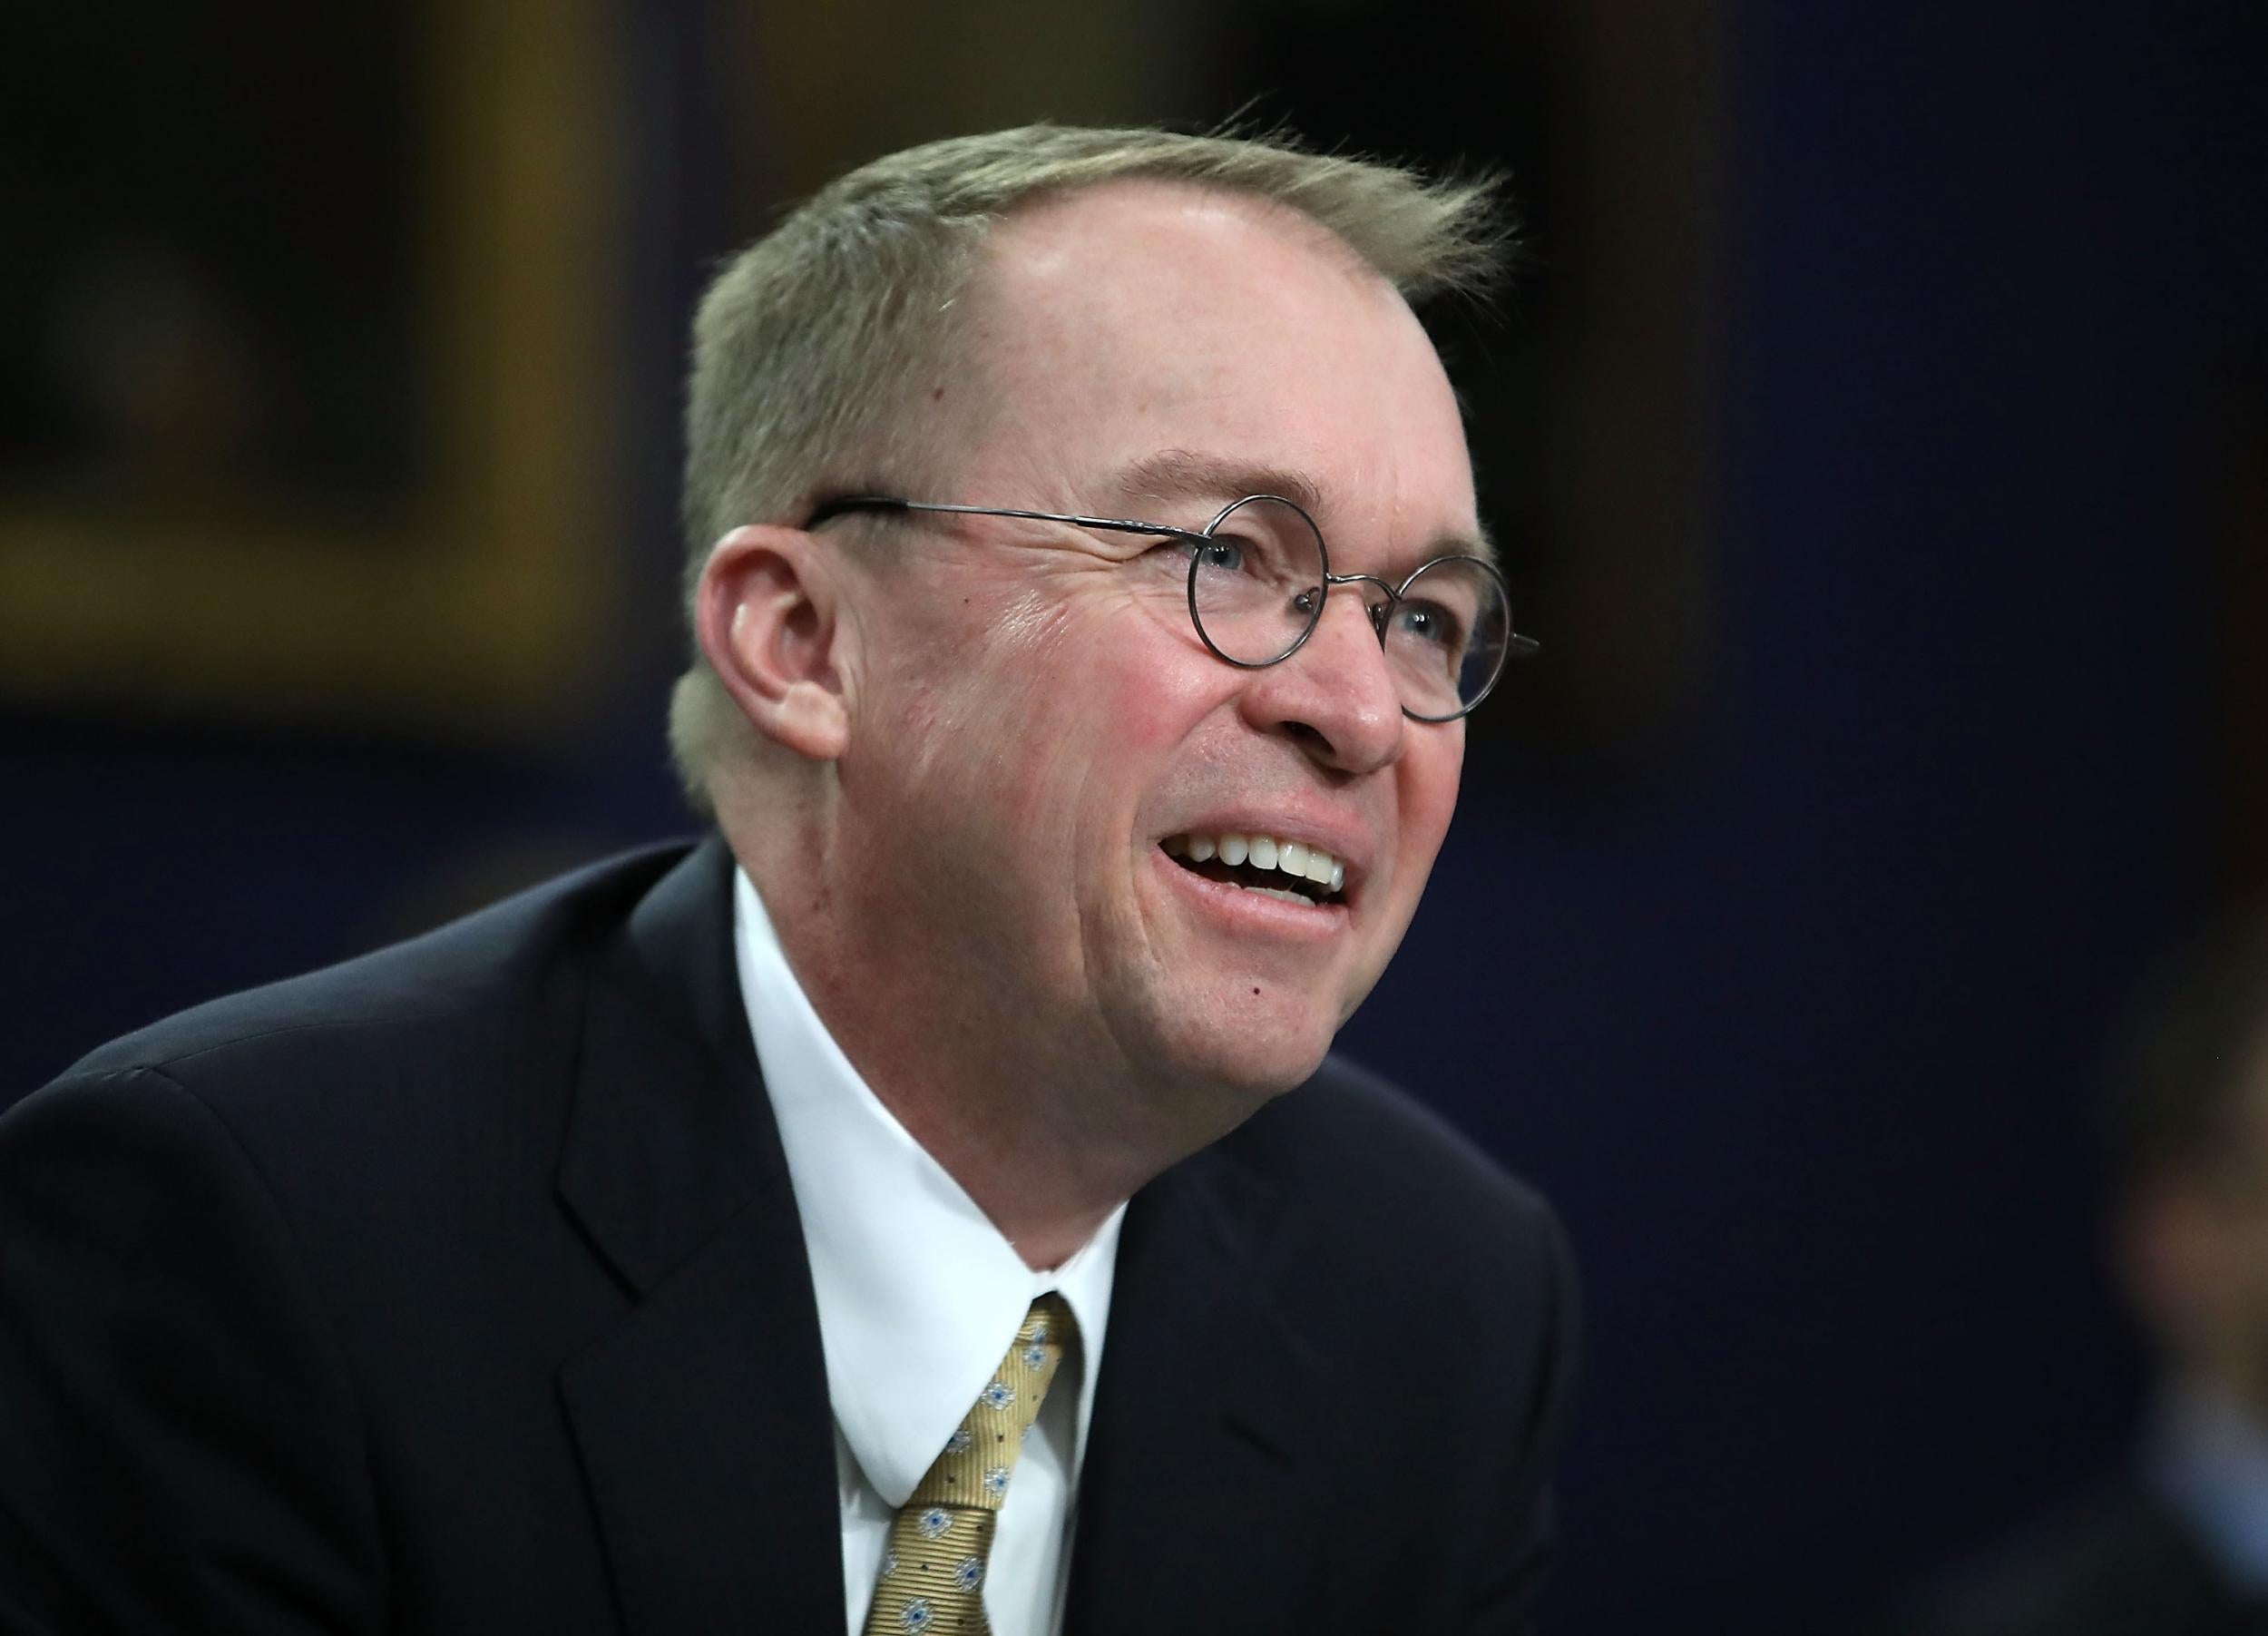 Office of Management and Budget Director Mick Mulvaney testifies during a House Appropriations Committee hearing on Capitol Hill